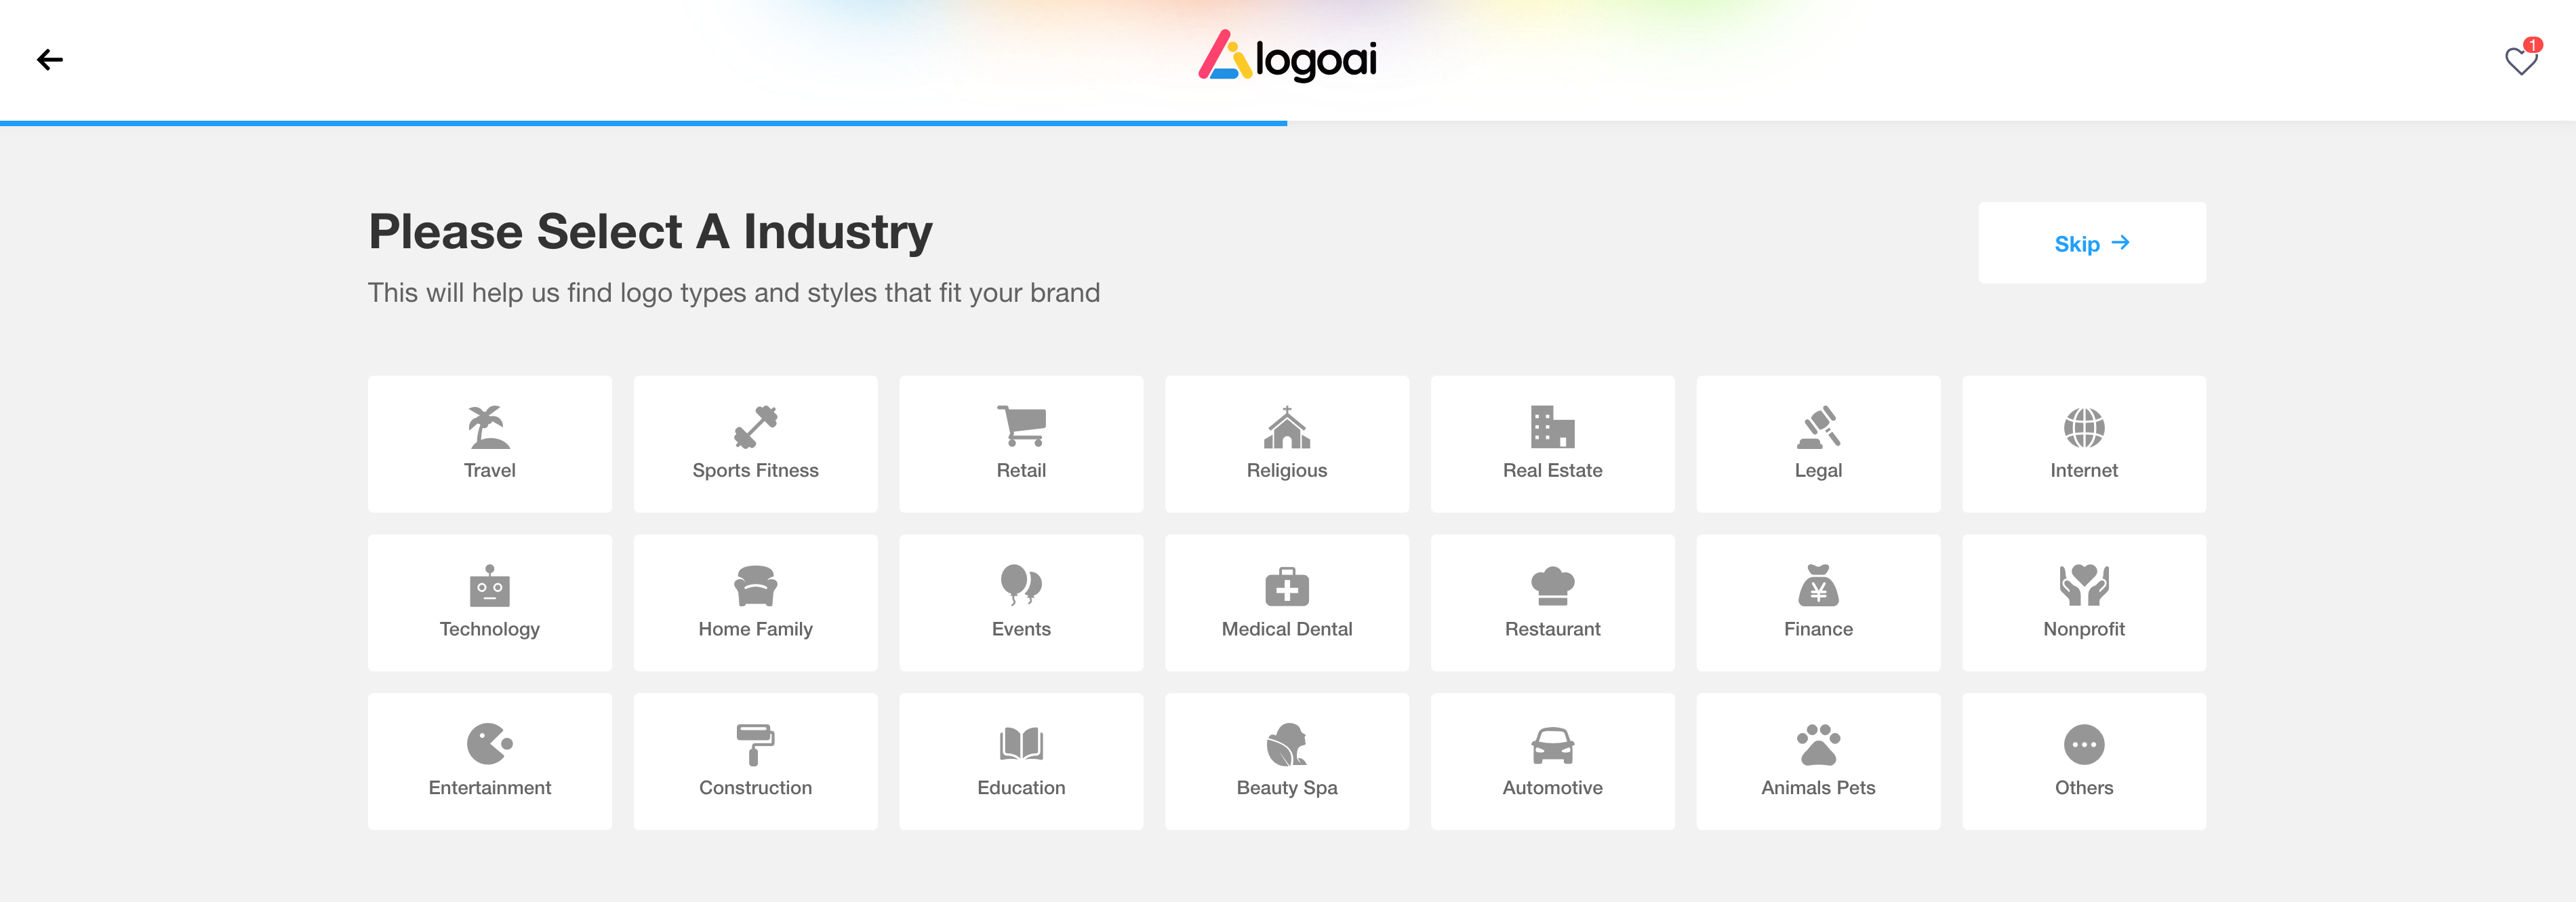 choose an industry for your abstract logo